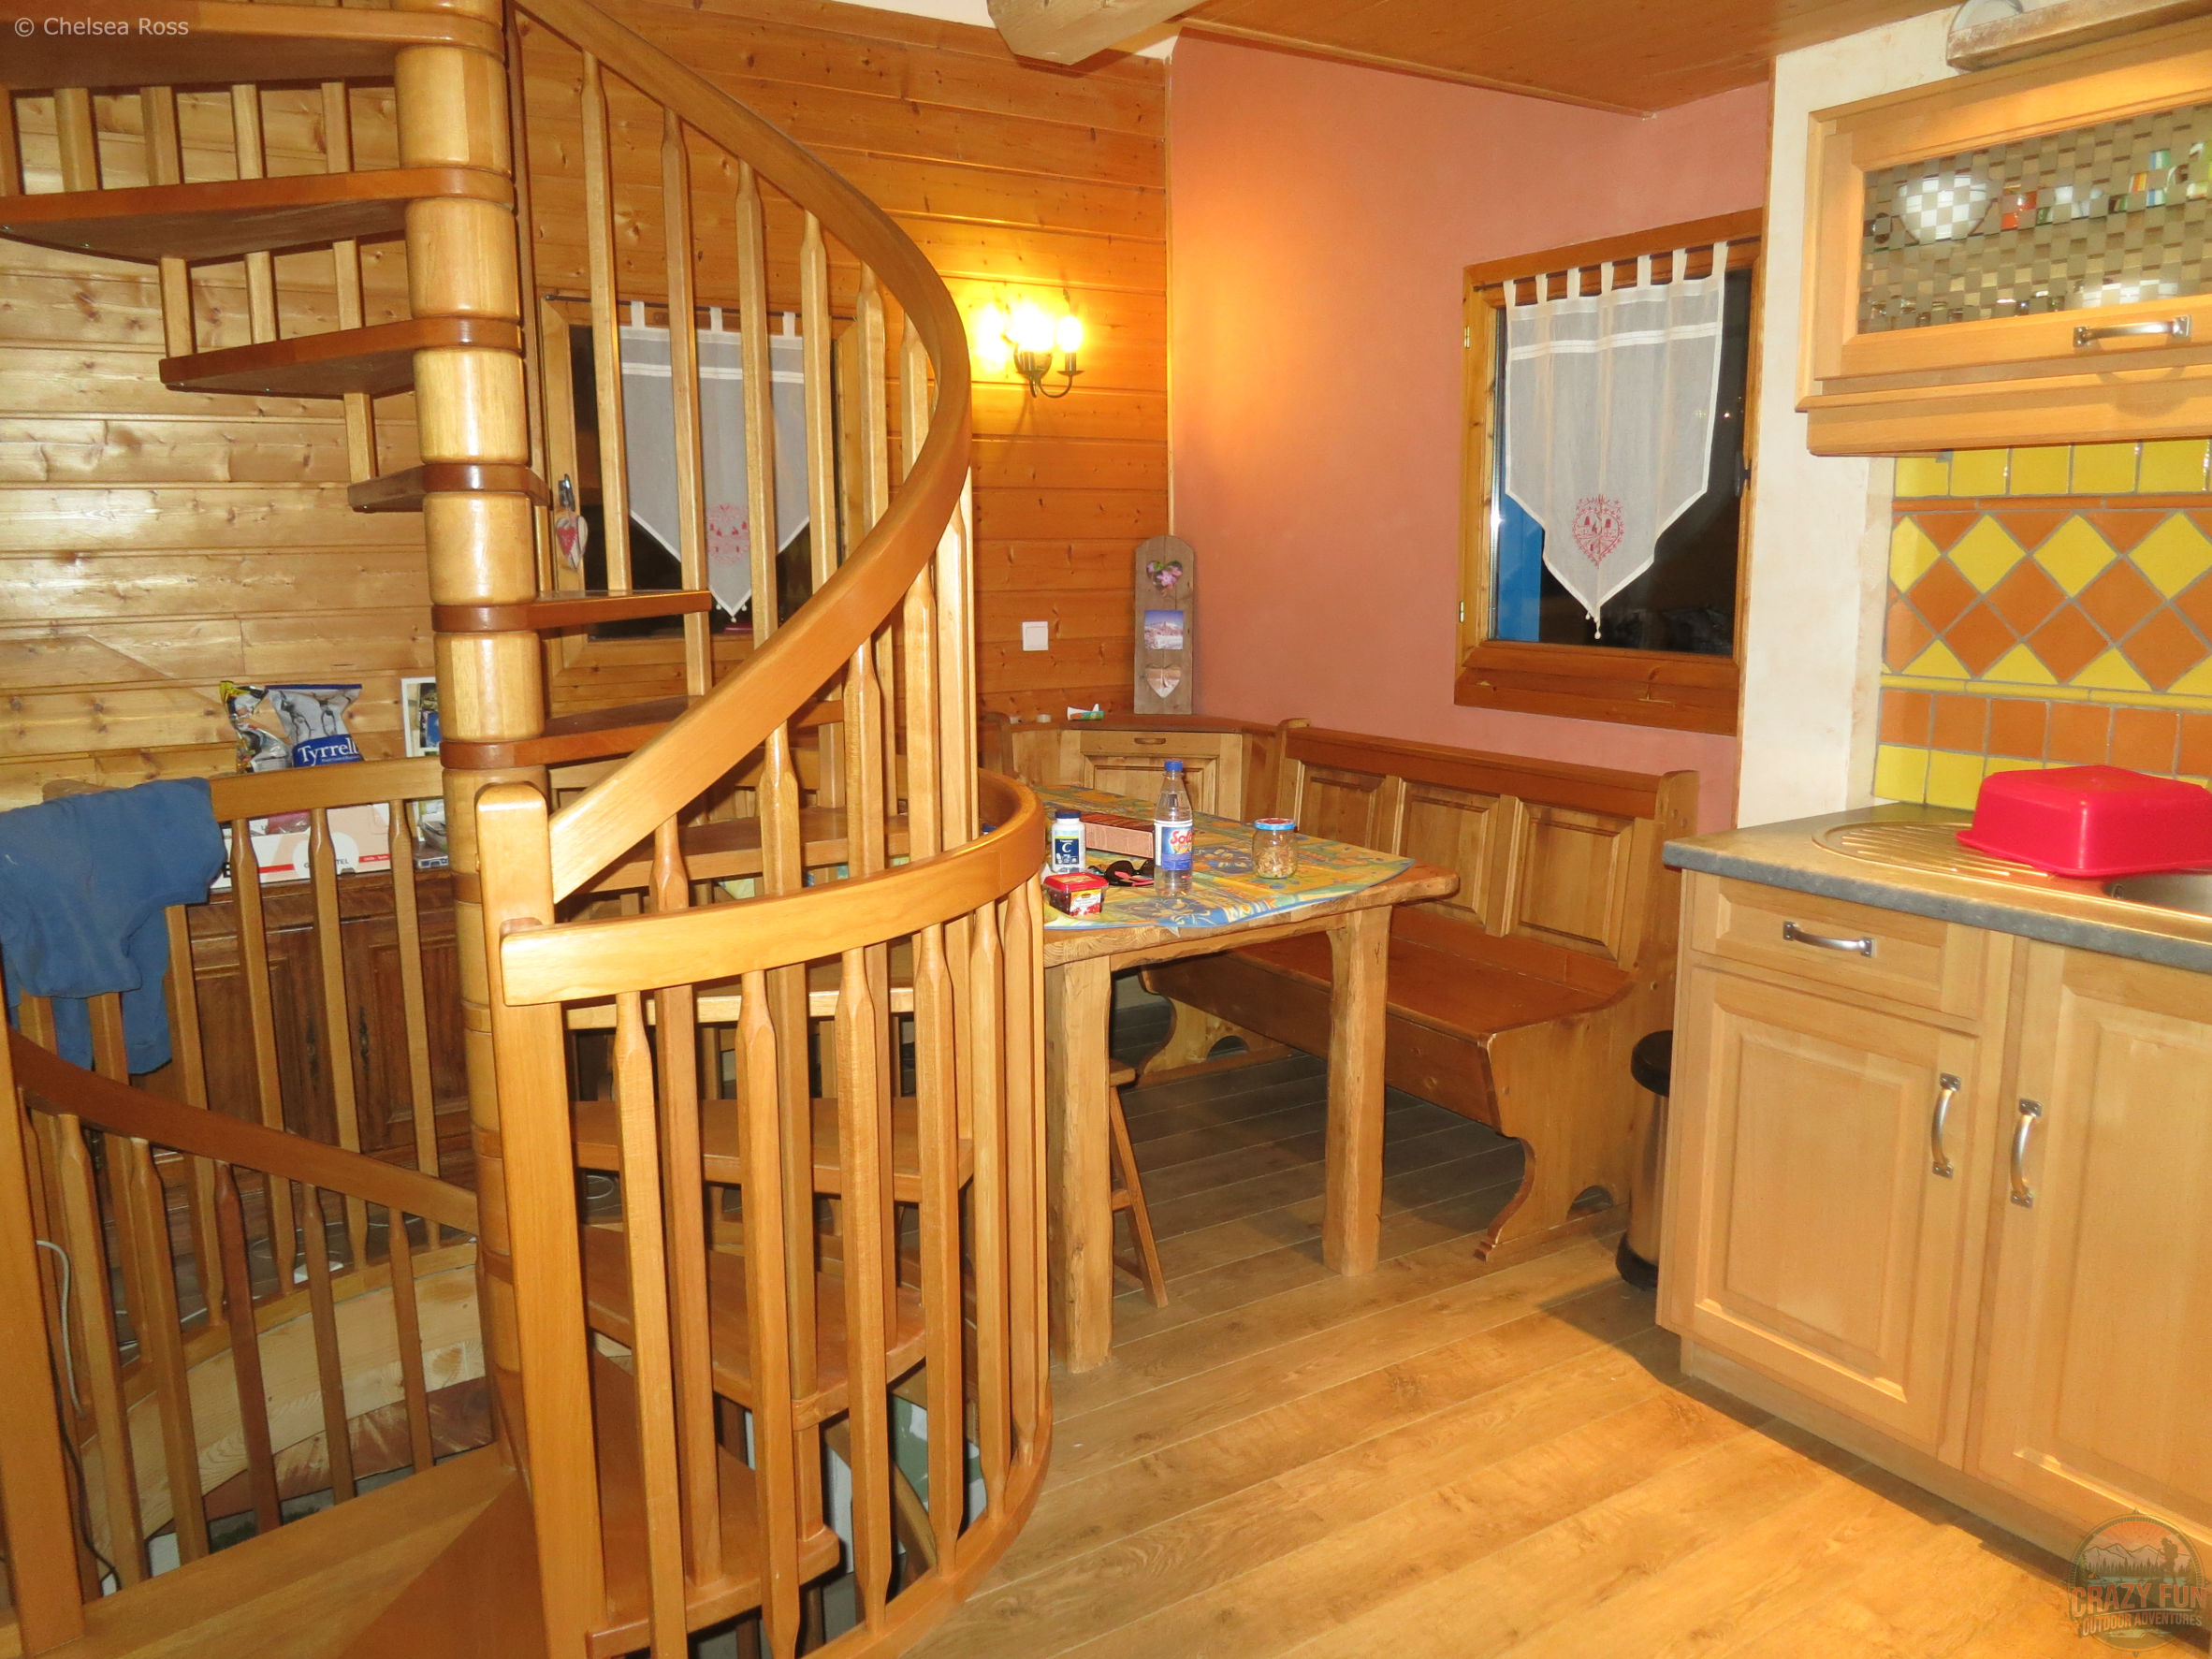 The inside of the chalet showcasing the main floor. It has circular wooden stairs, a sitting area in the corner with a kitchen to the far right.